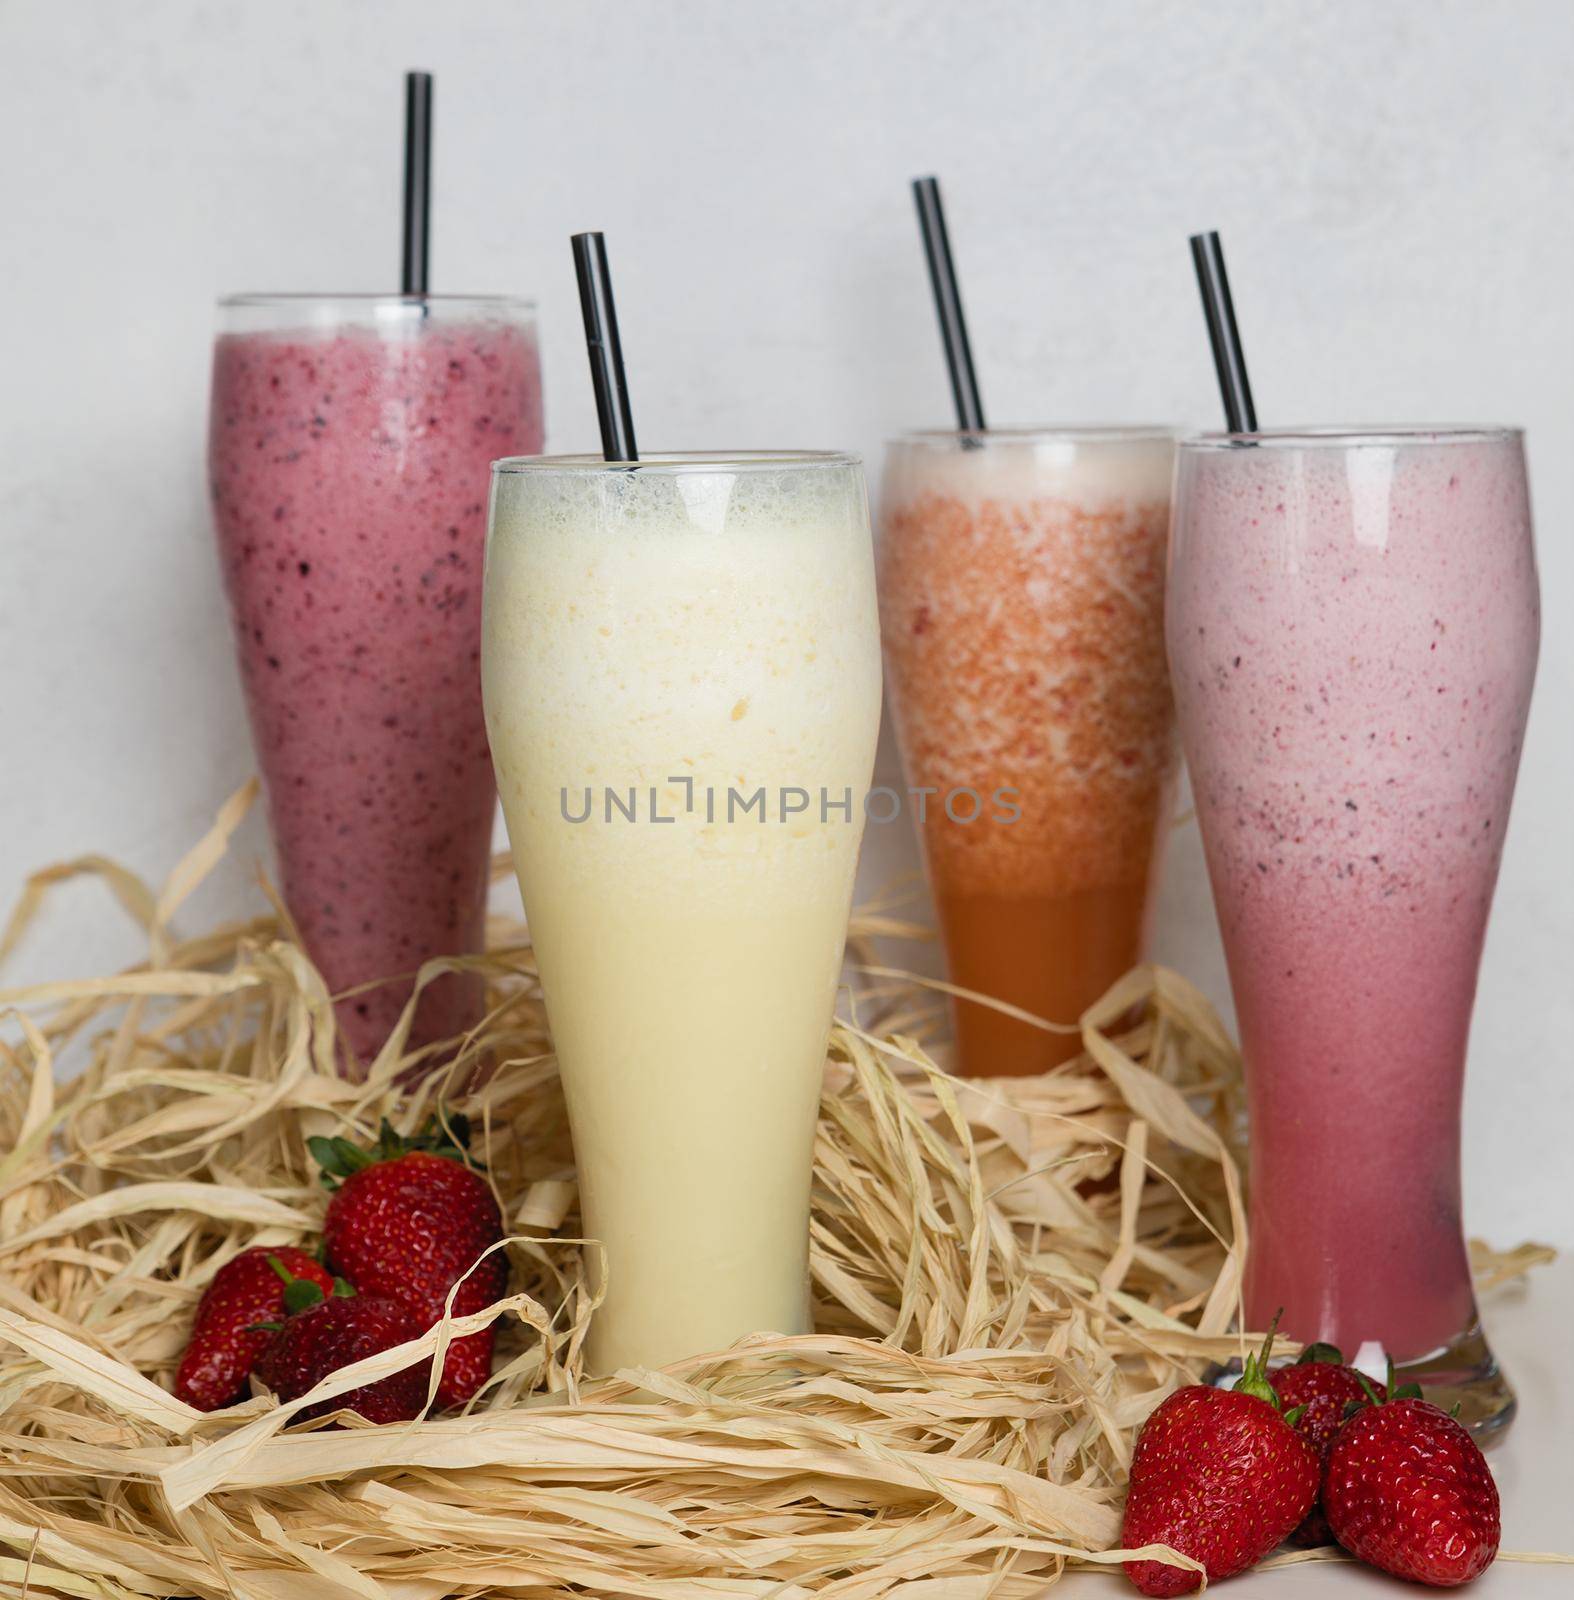 Fruit milky cocktails with strawberry on a straw by ferhad